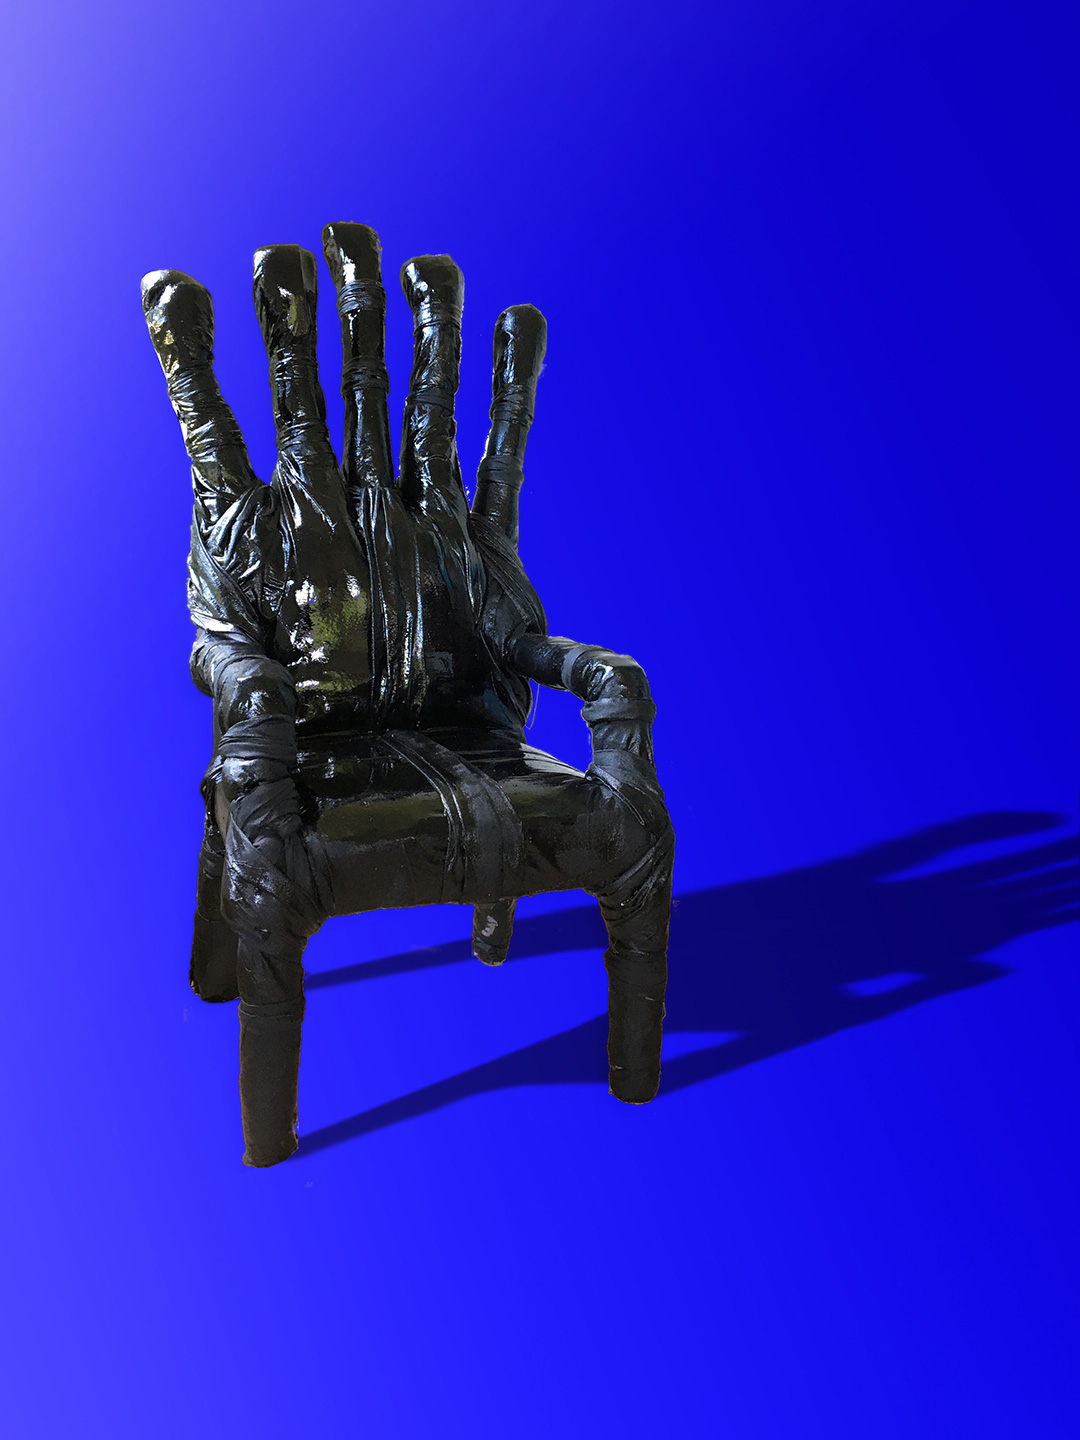 The poorly upholstered throne